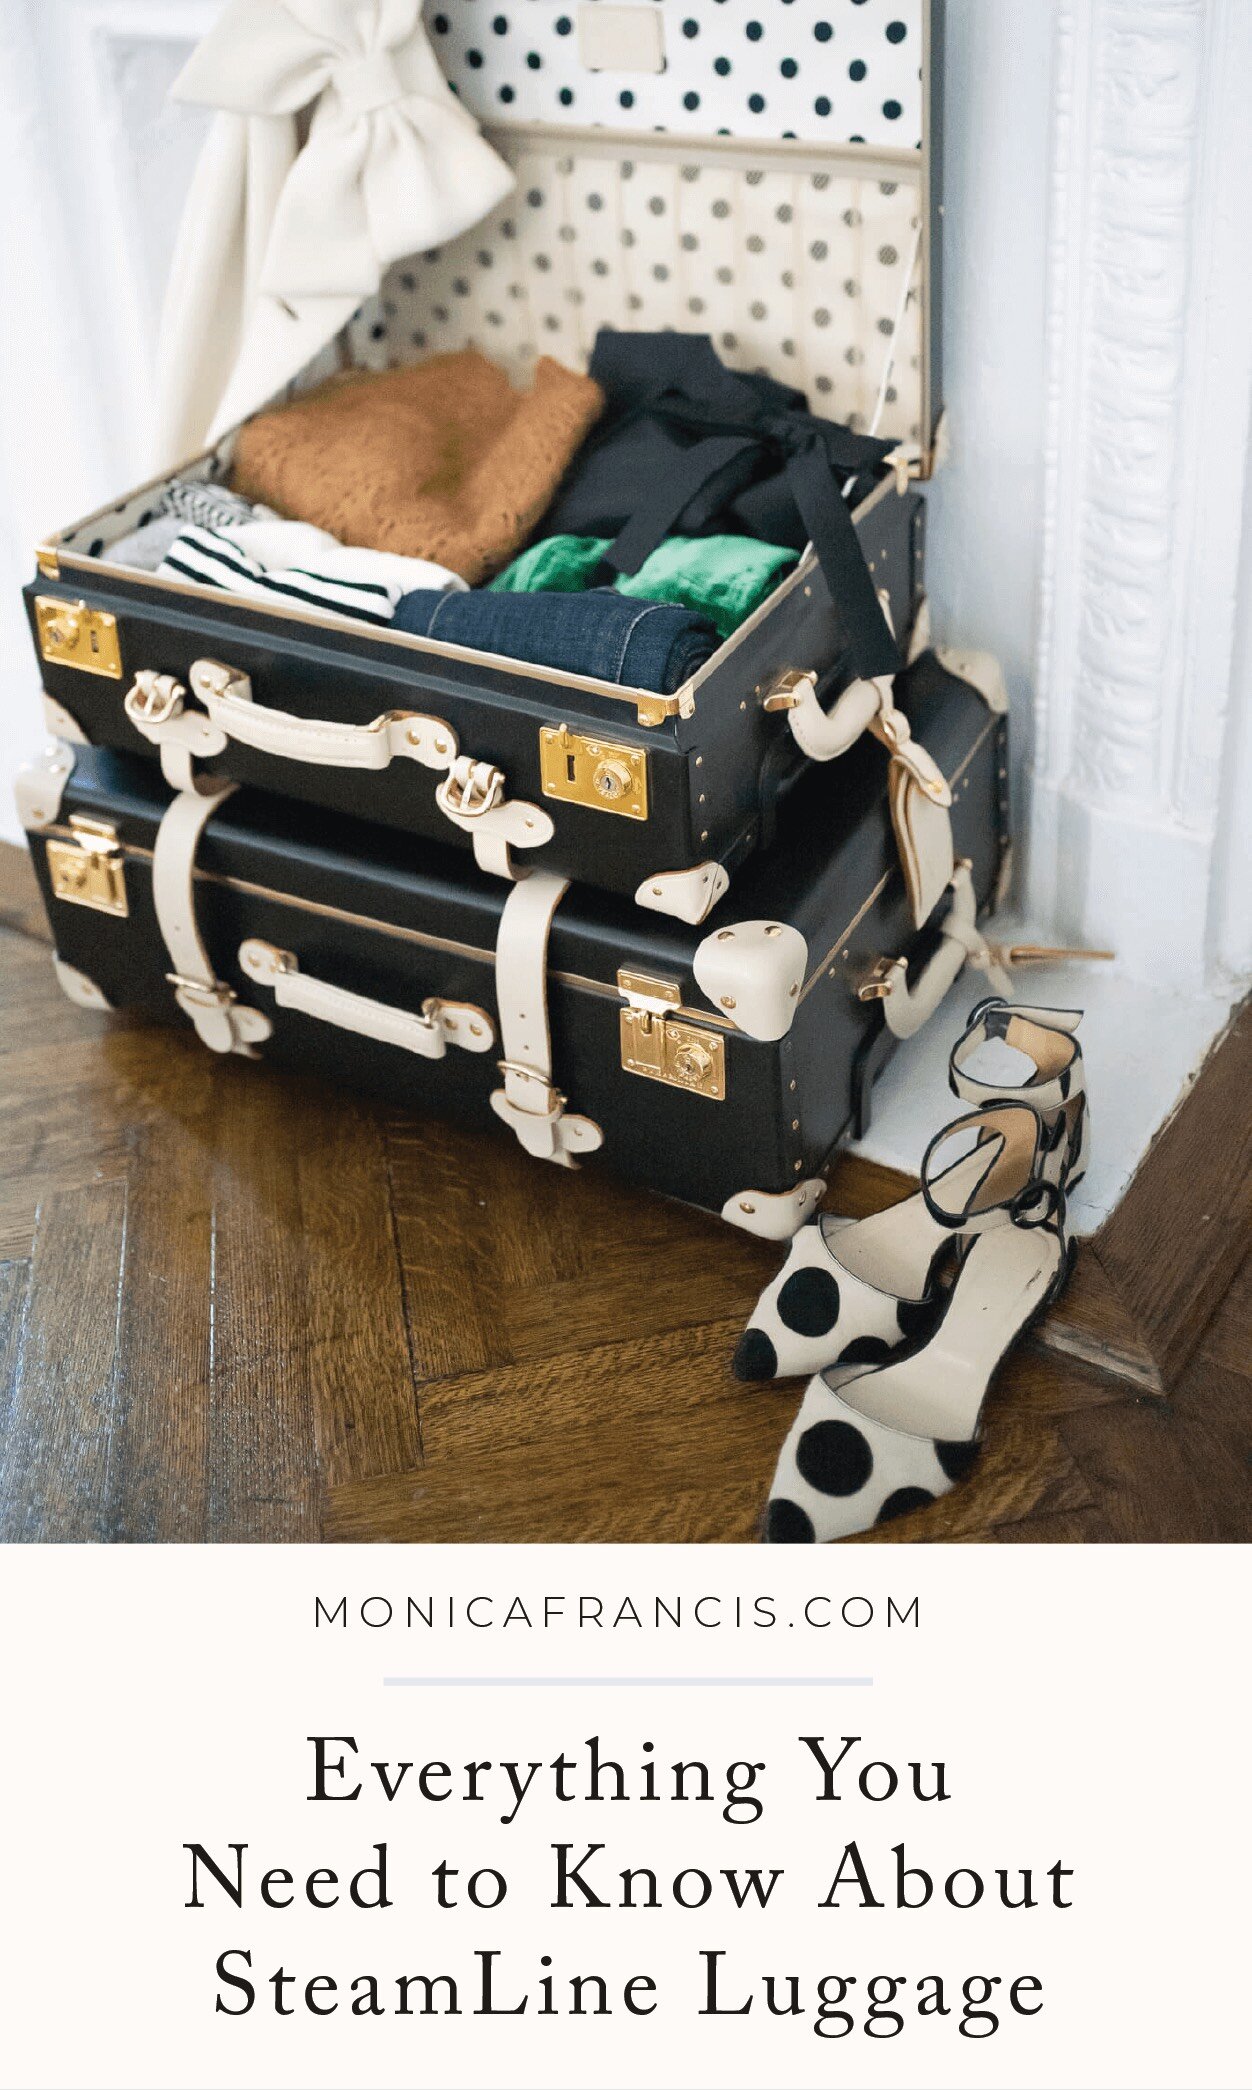 Everything You Need To Know About SteamLine Luggage | After traveling with the SteamLine Luggage Starlet set for a few years, I’m answering all the questions you’ve asked. The quality of the suitcases, how to take care of them,   which size is best,…